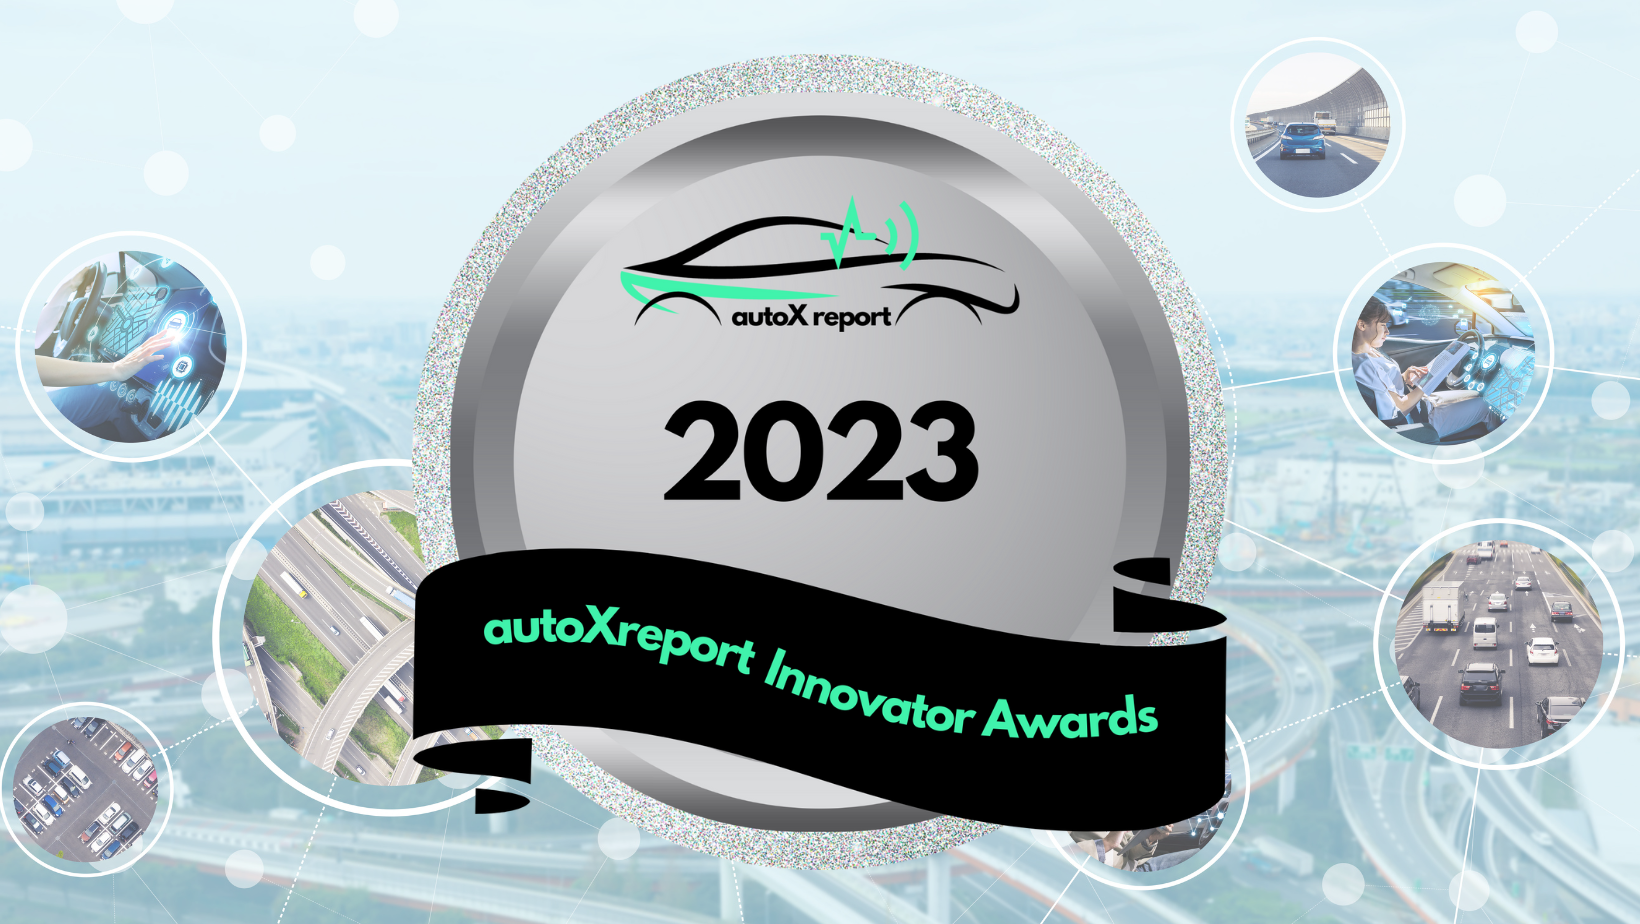 The 2023 autoXreport Innovator Awards Honors Executives and Companies in Auto Tech